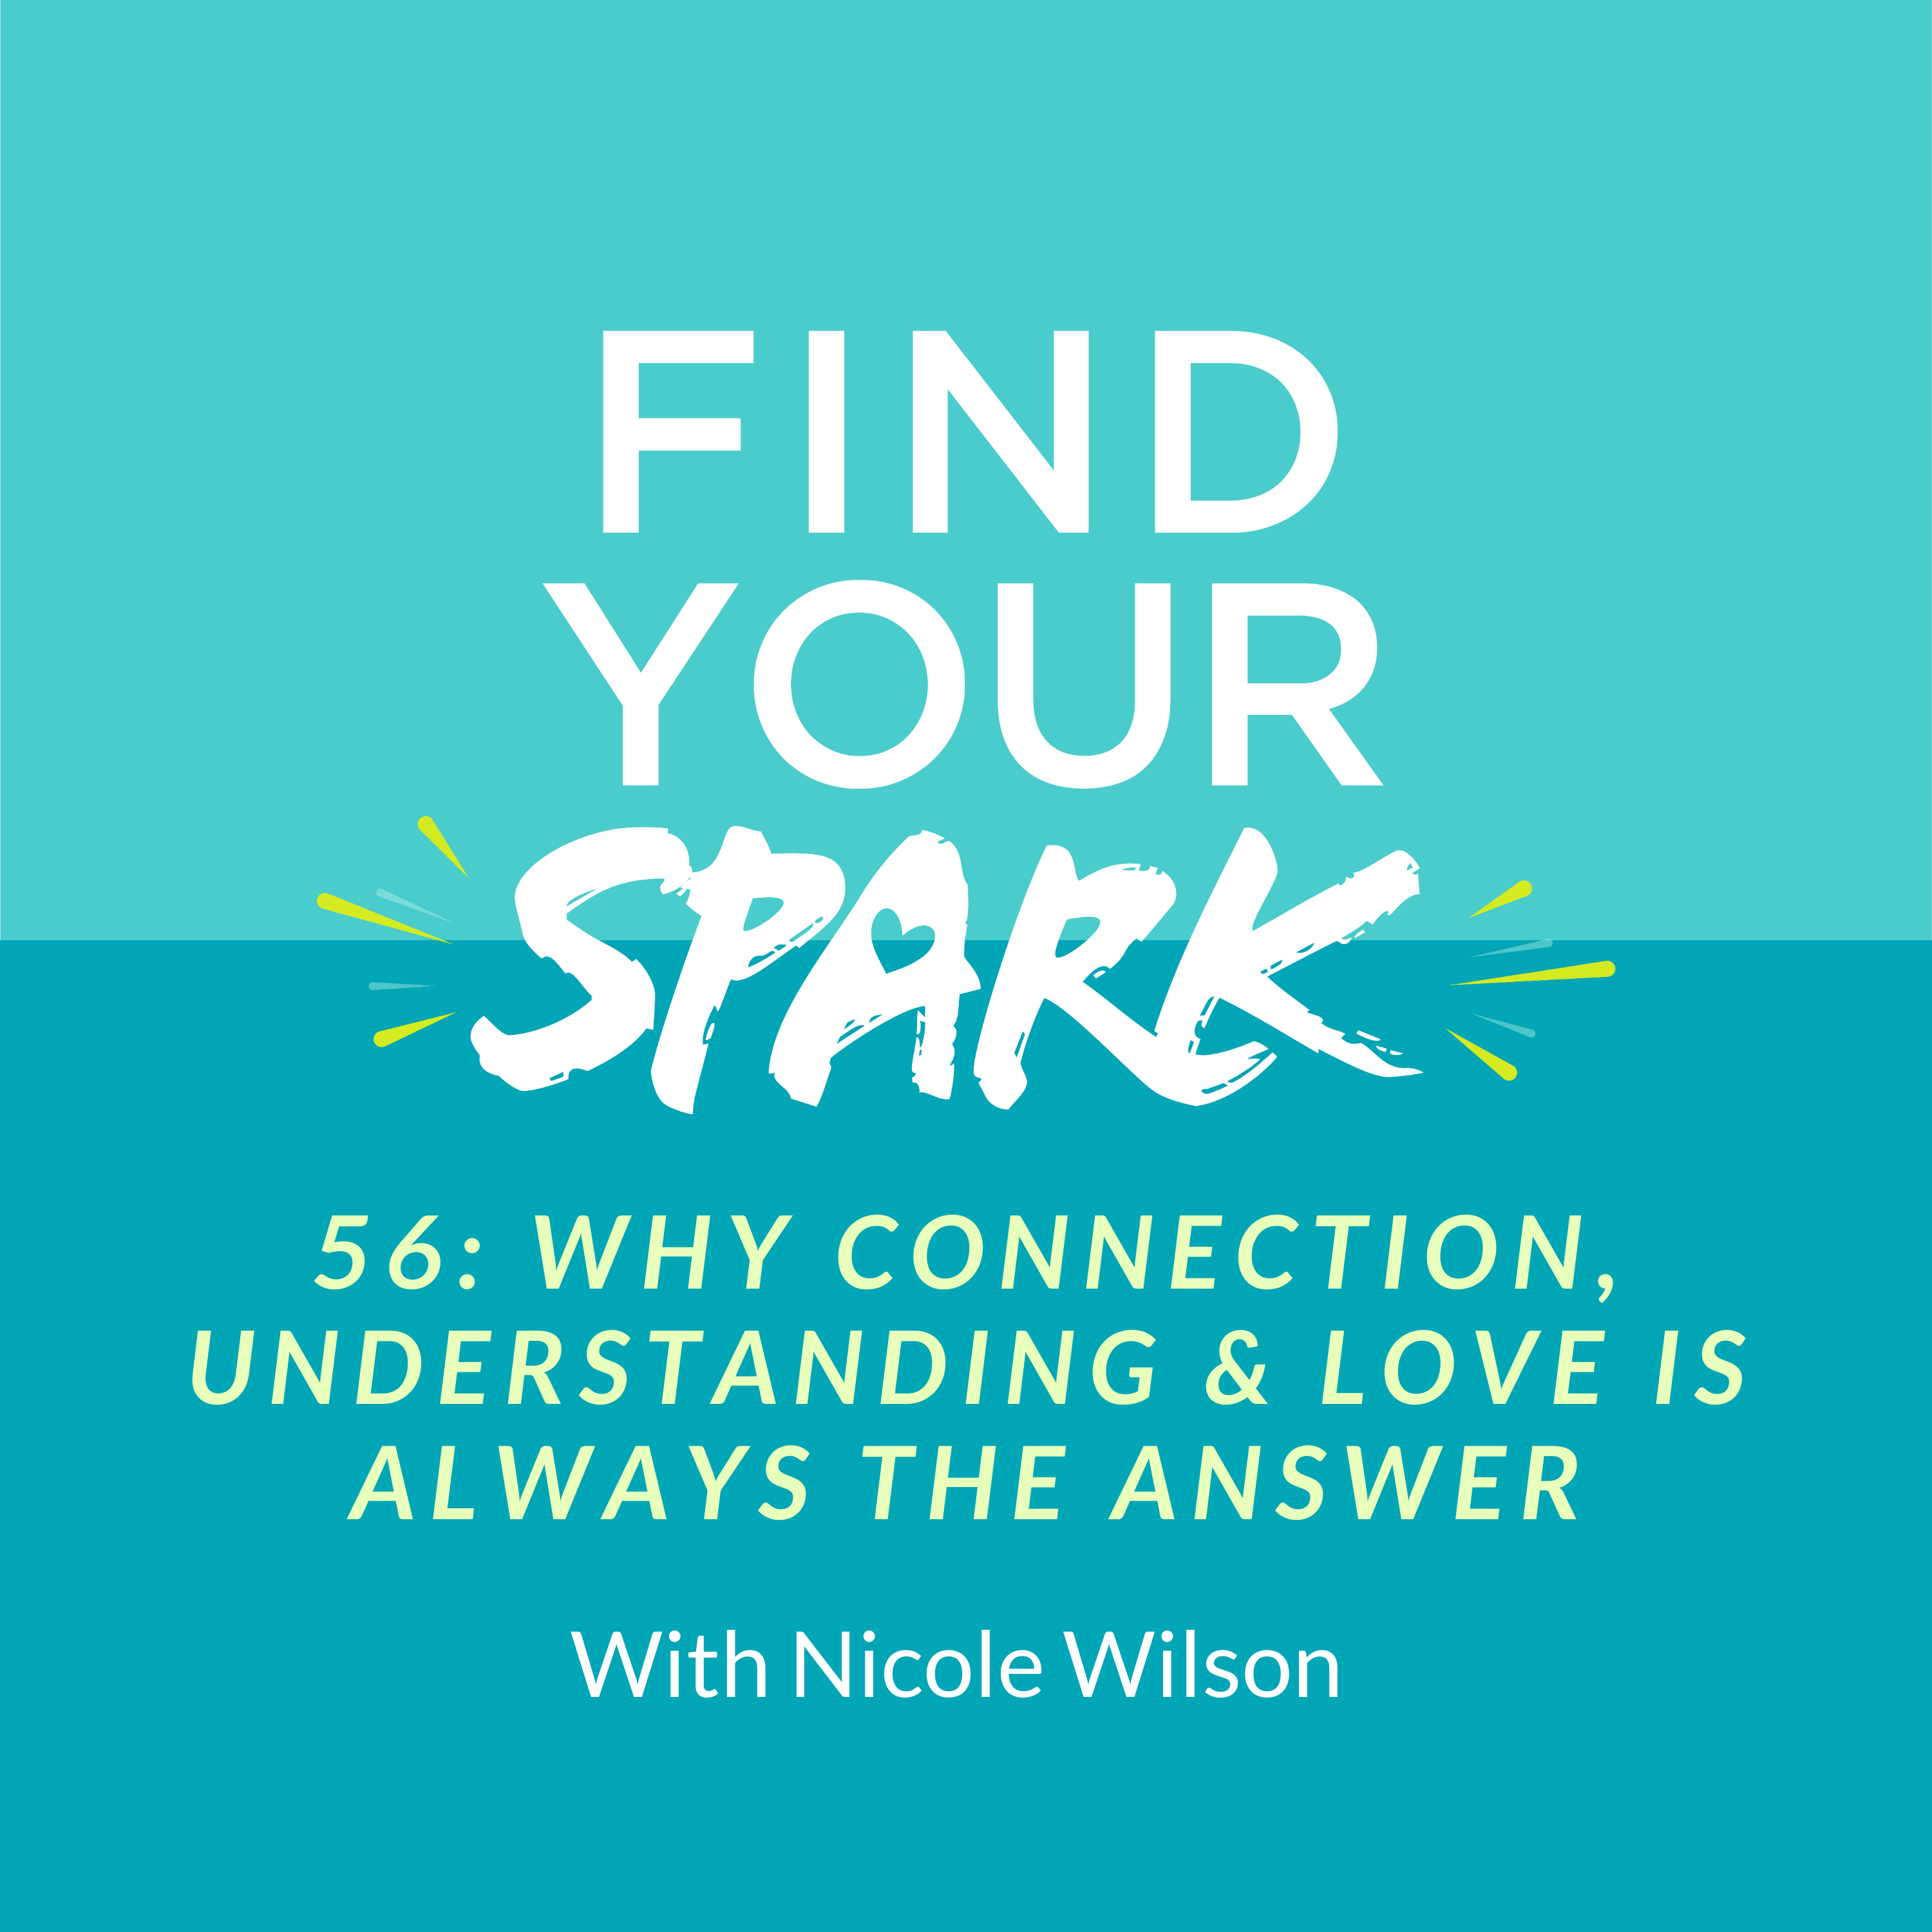 56: Why Connection, Understanding & Love is Always the Answer